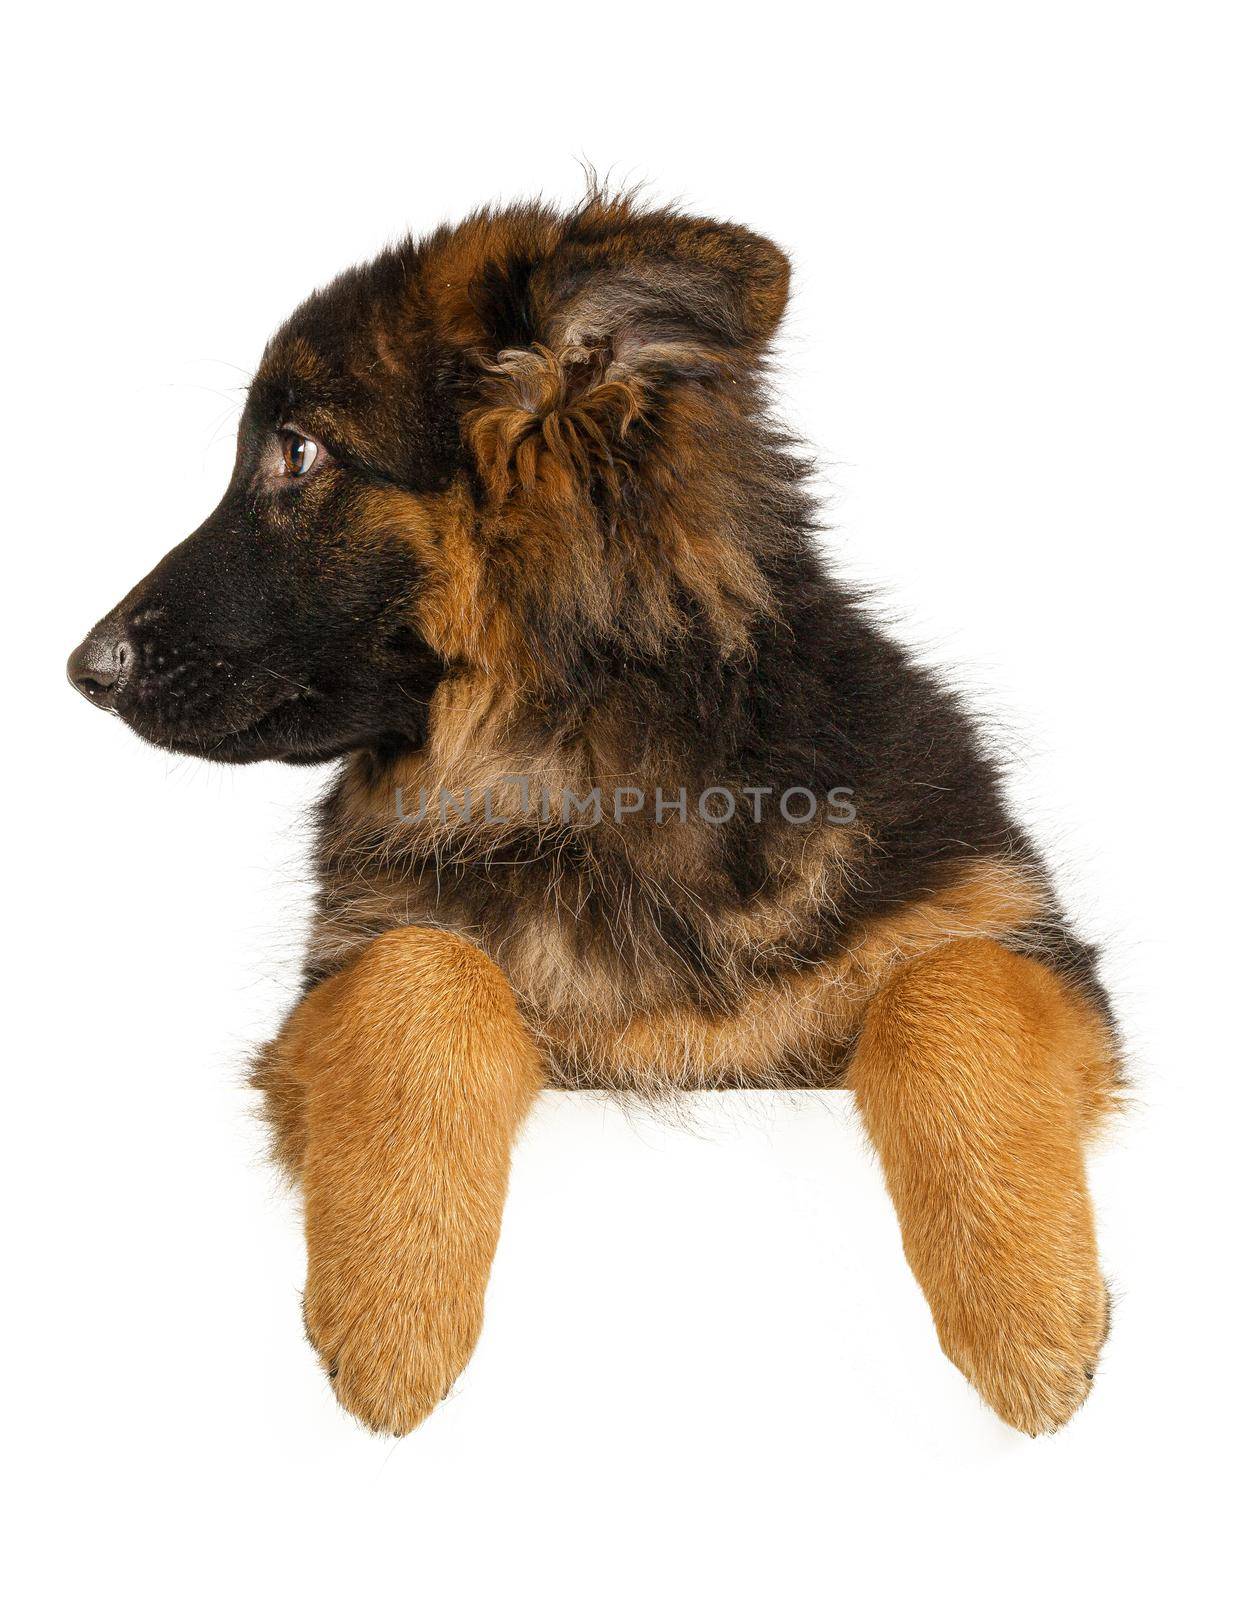 Puppy German Shepherd holding a banner isolated on a white background by Fabrikasimf